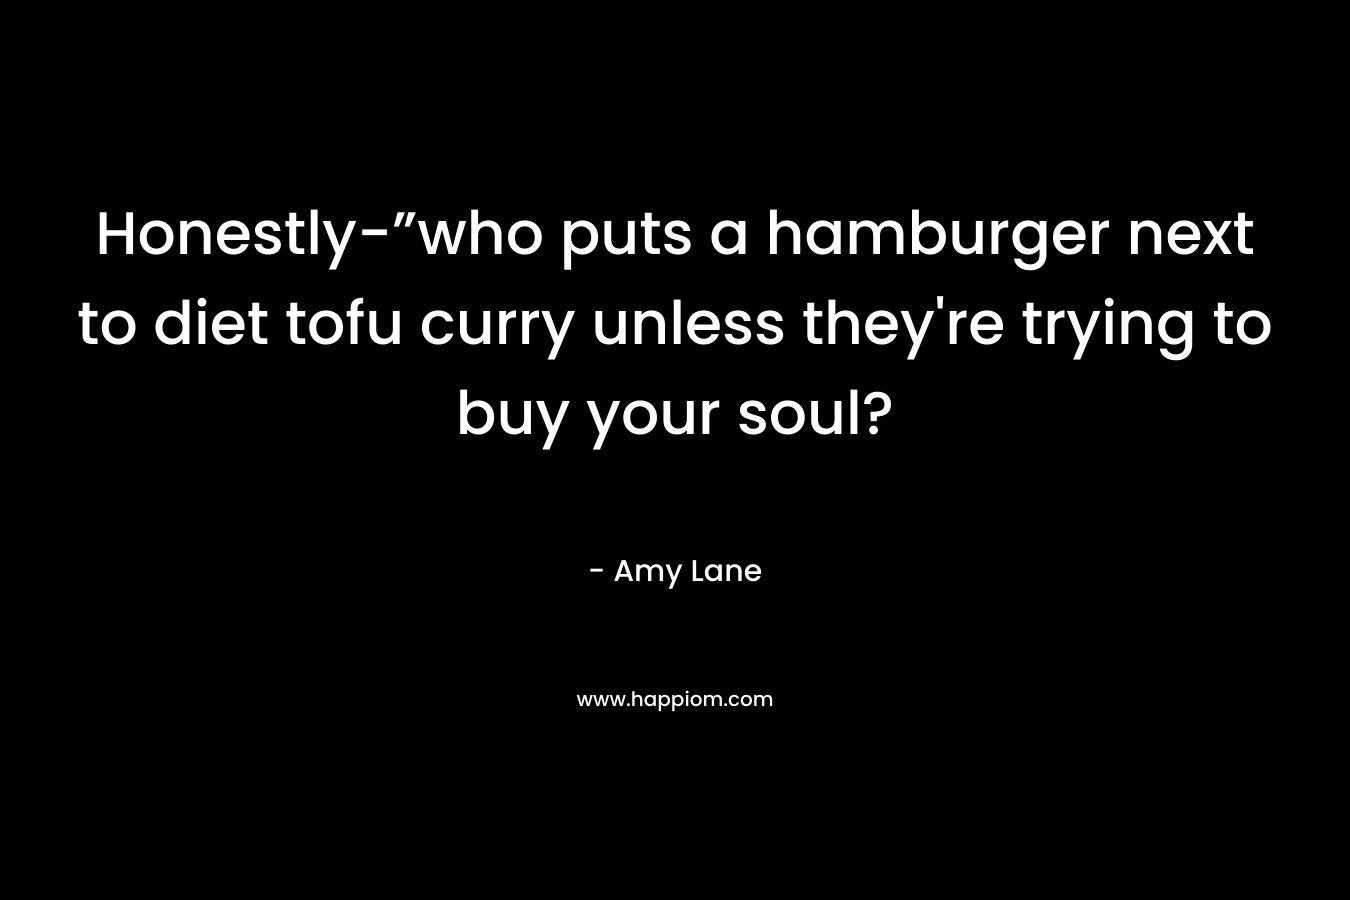 Honestly-”who puts a hamburger next to diet tofu curry unless they’re trying to buy your soul? – Amy Lane